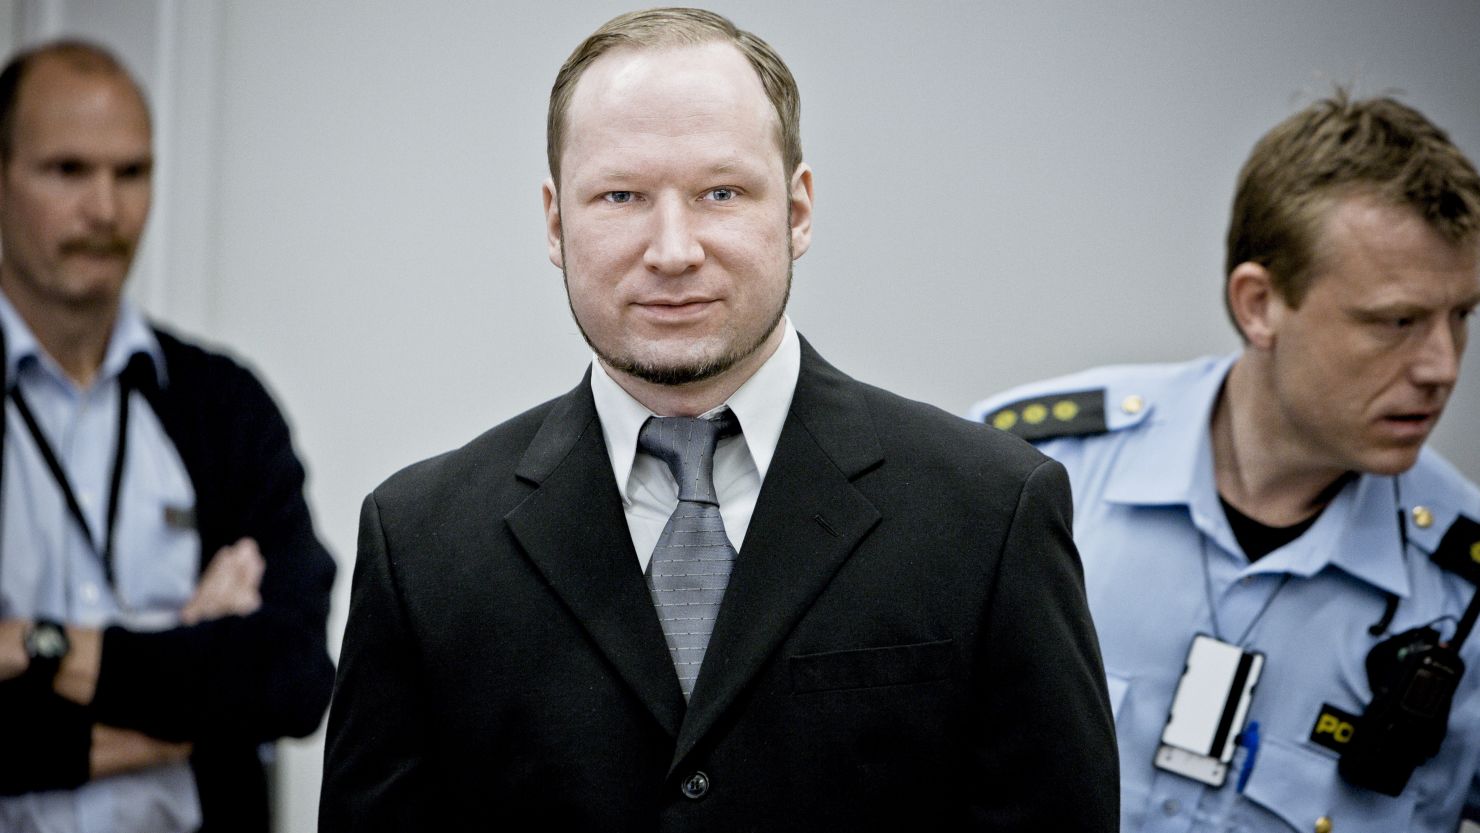 Anders Breivik boasts of being an ultranationalist who killed his victims to fight multiculturalism in Norway.